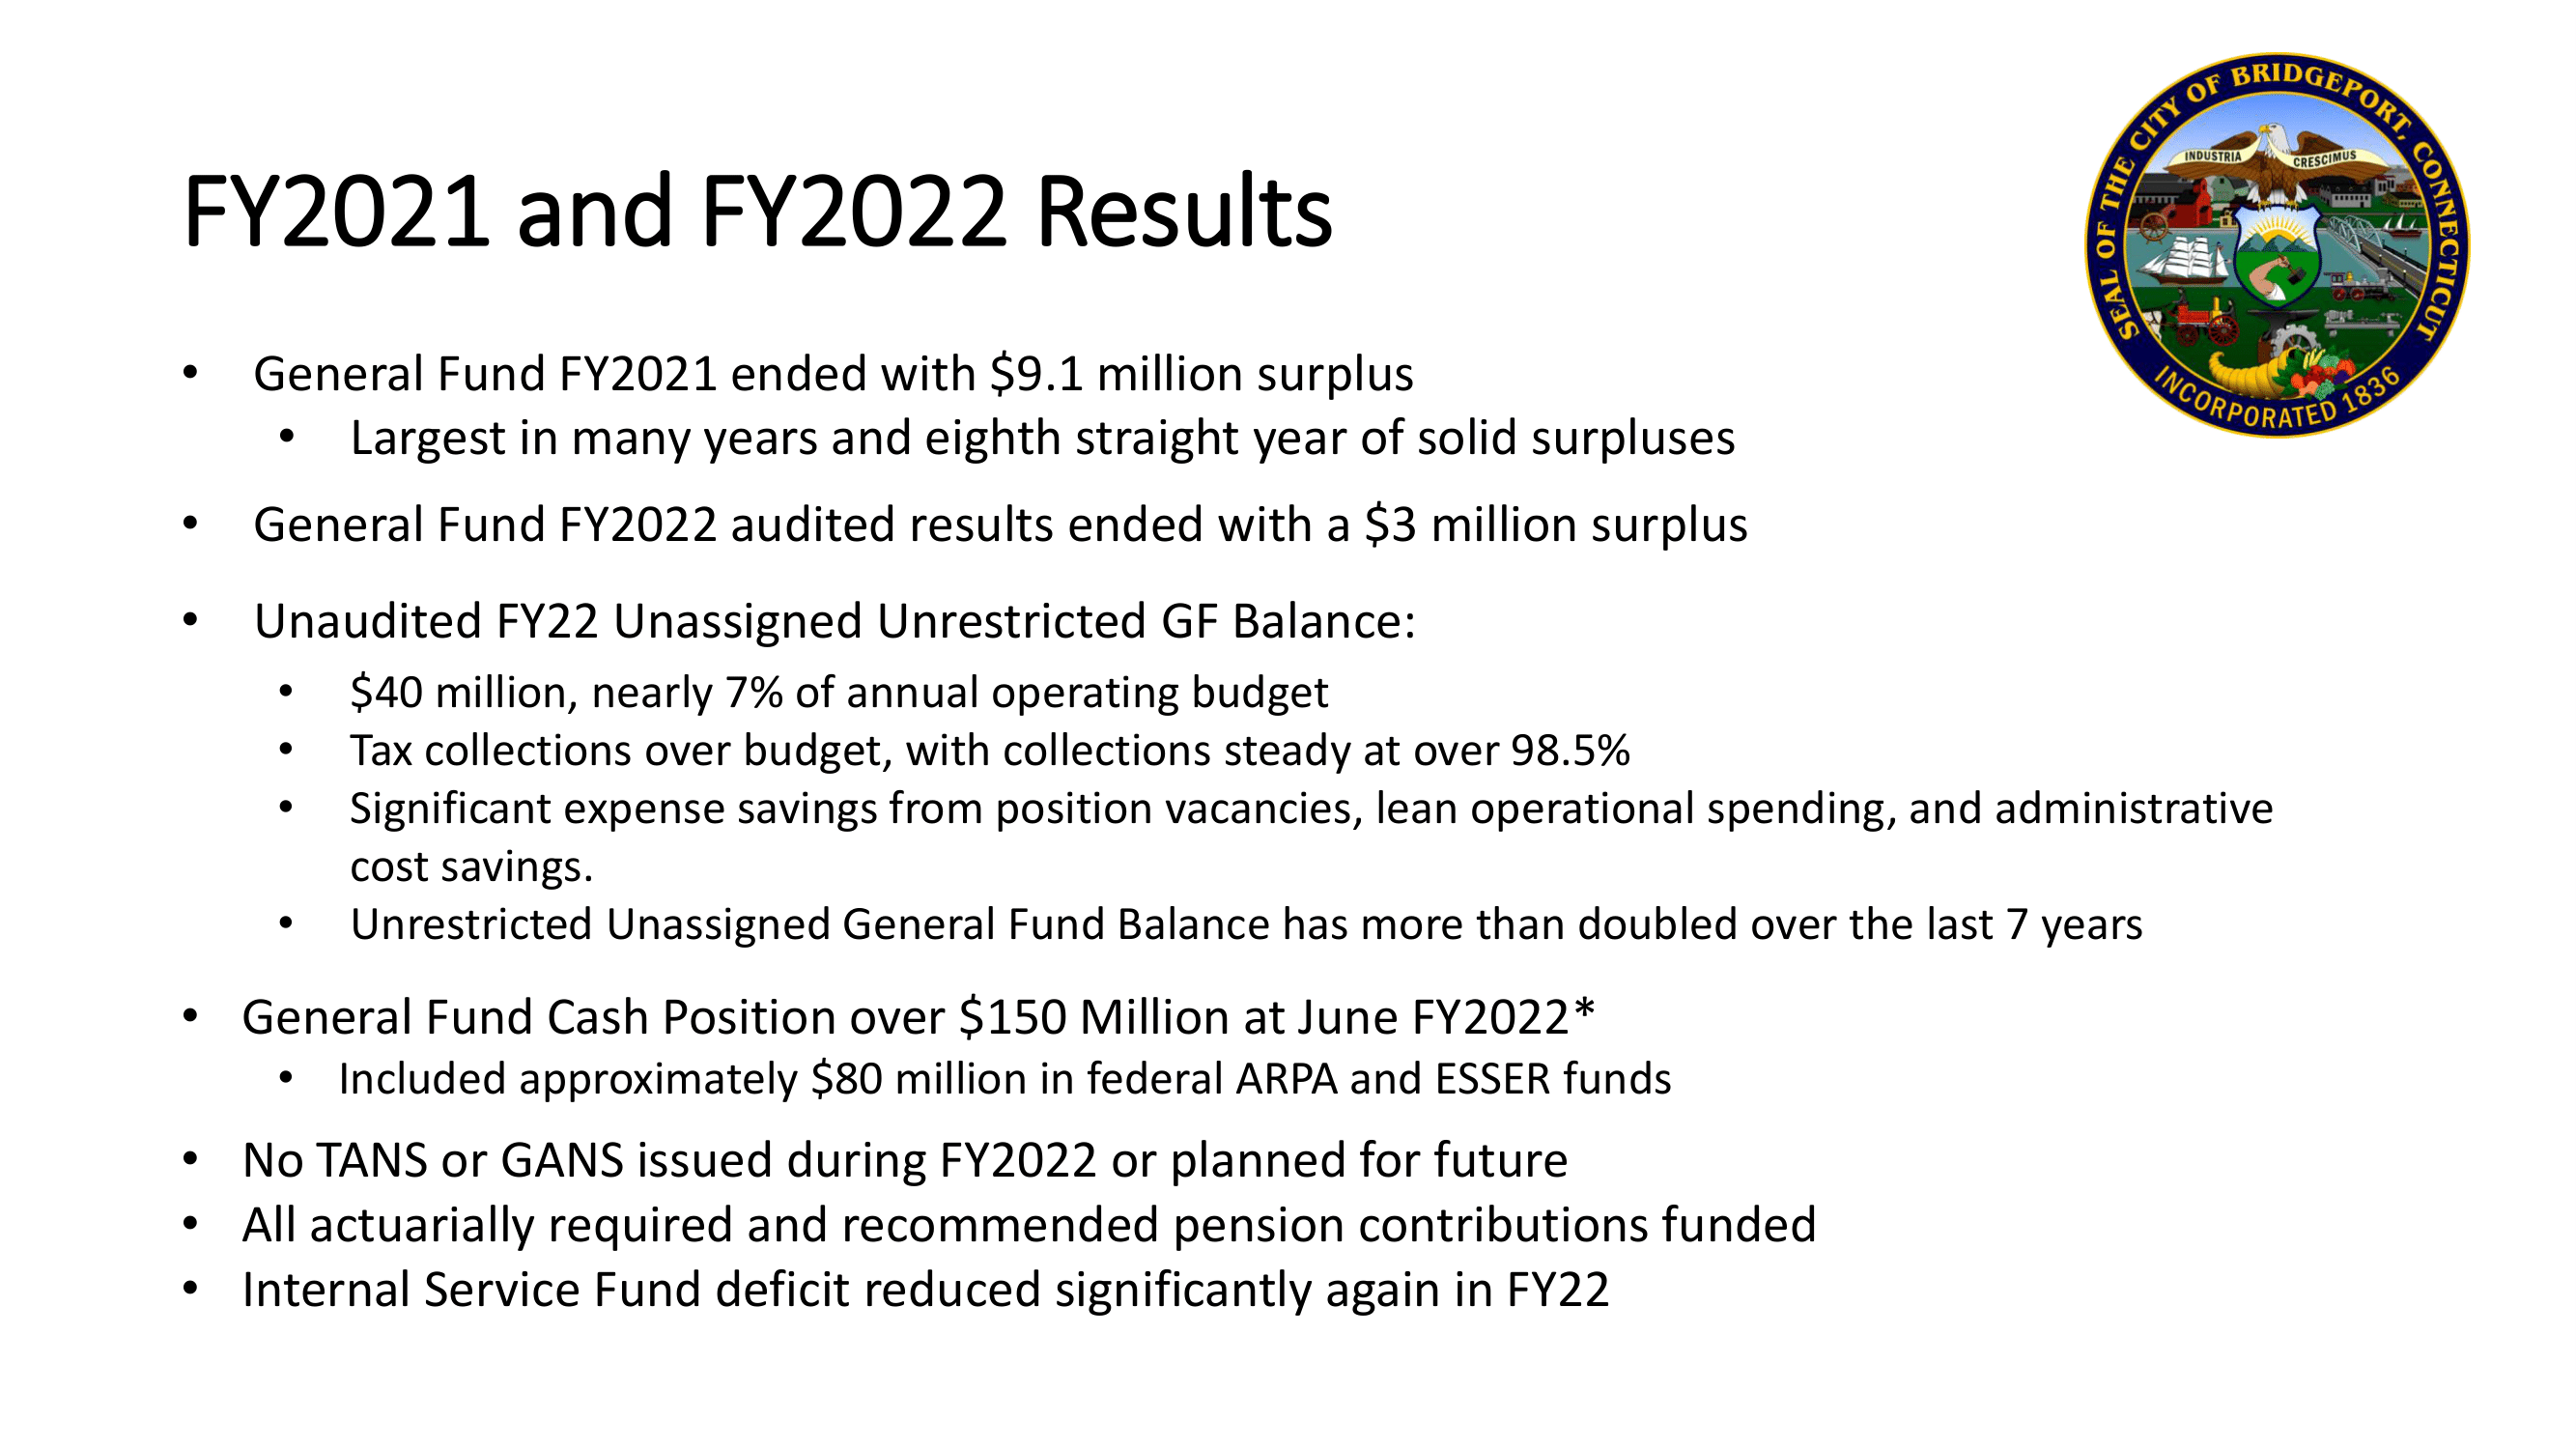 FY21/22 Results